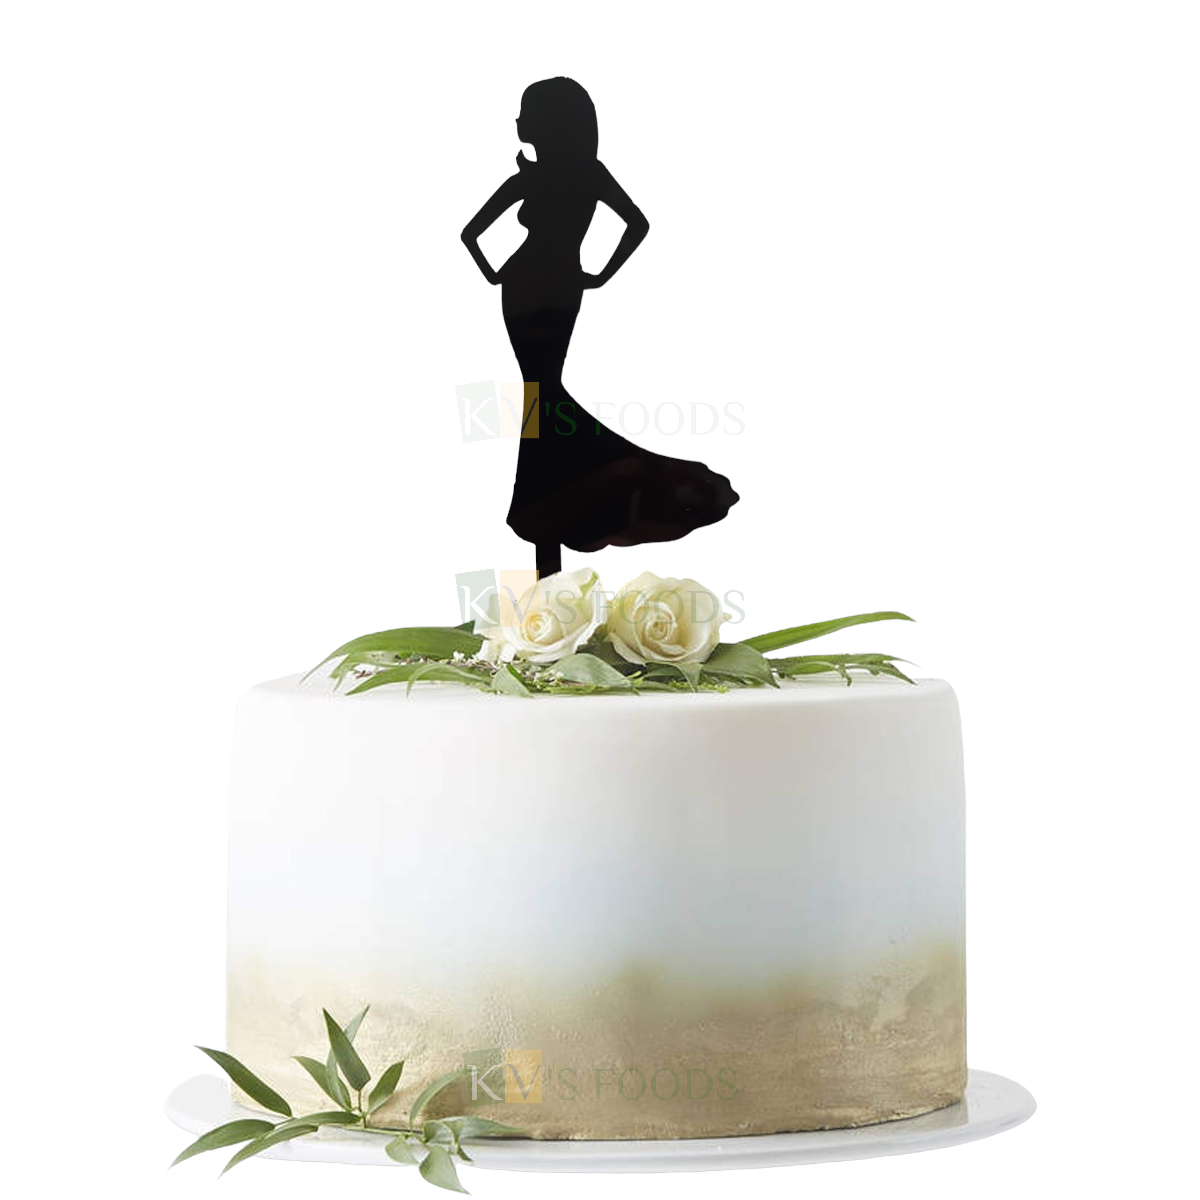 1PC Black Acrylic Beautiful Dress and Standing Lady Topper Girls Happy Birthday Themed Cake Insert, Womans Pose Silhouette Cake Topper DIY Cake Decoration